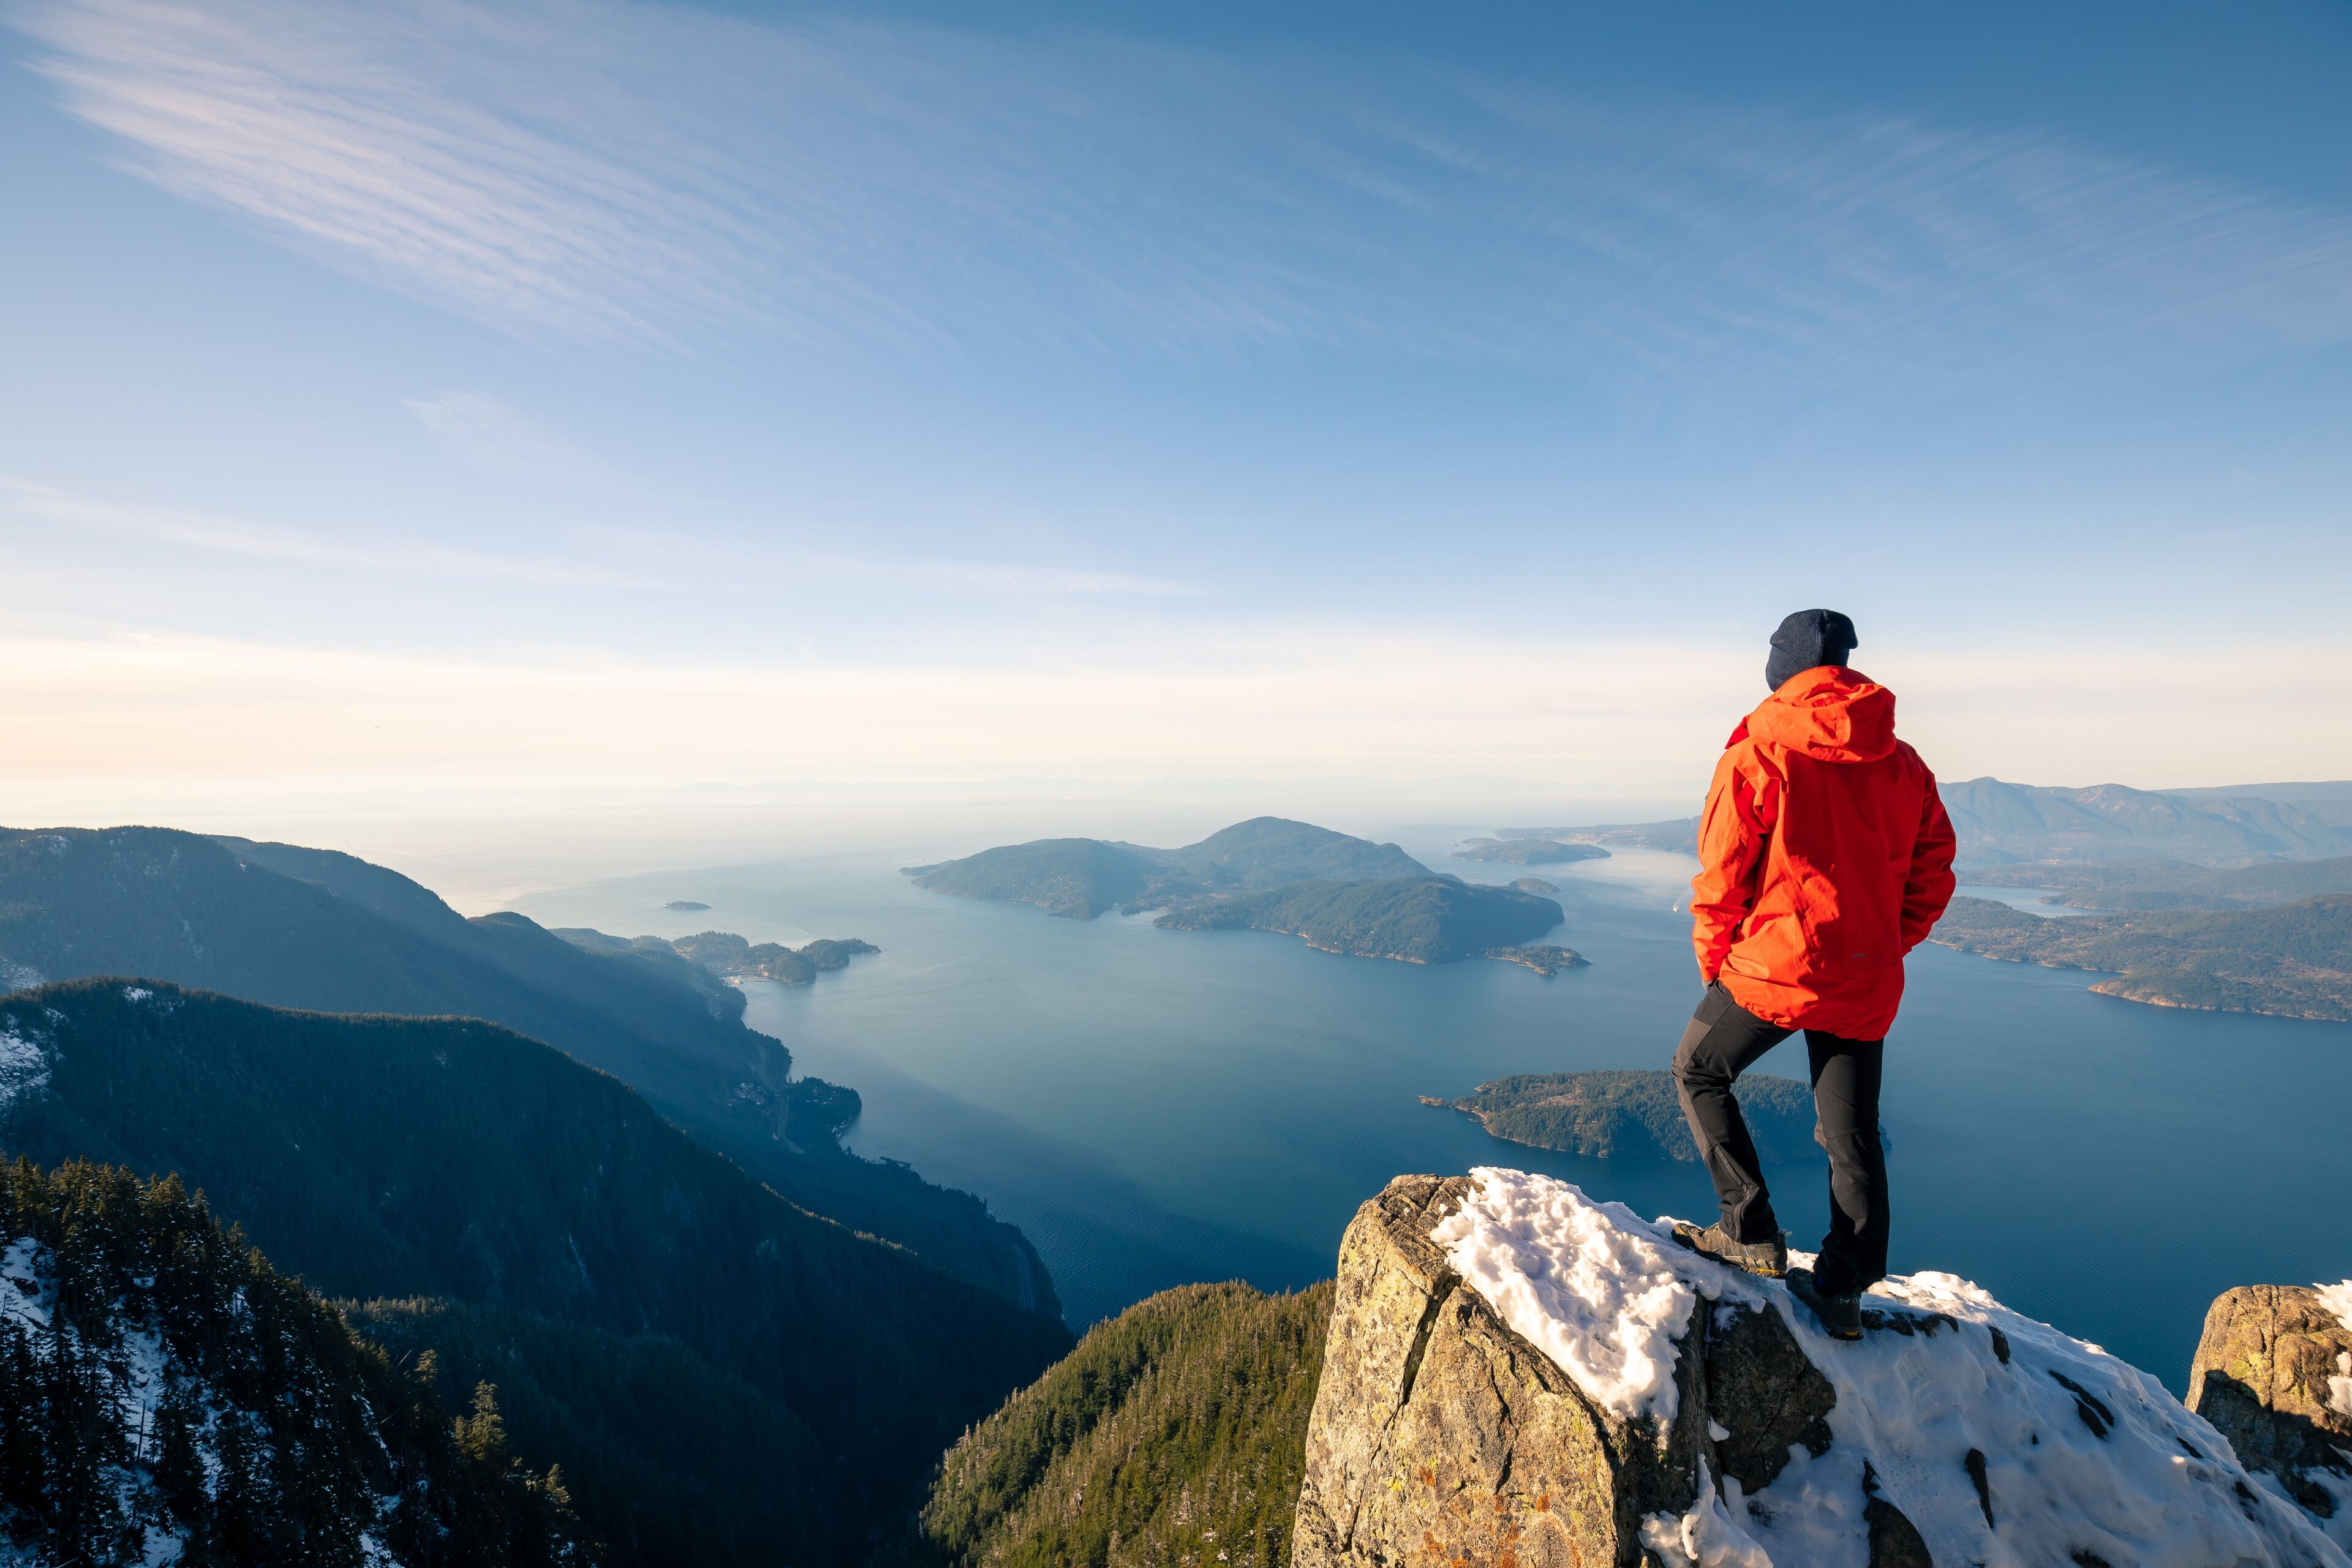 Man standing on mountain peak with snow overlooking ocean and islands in Vancouver, Canada.